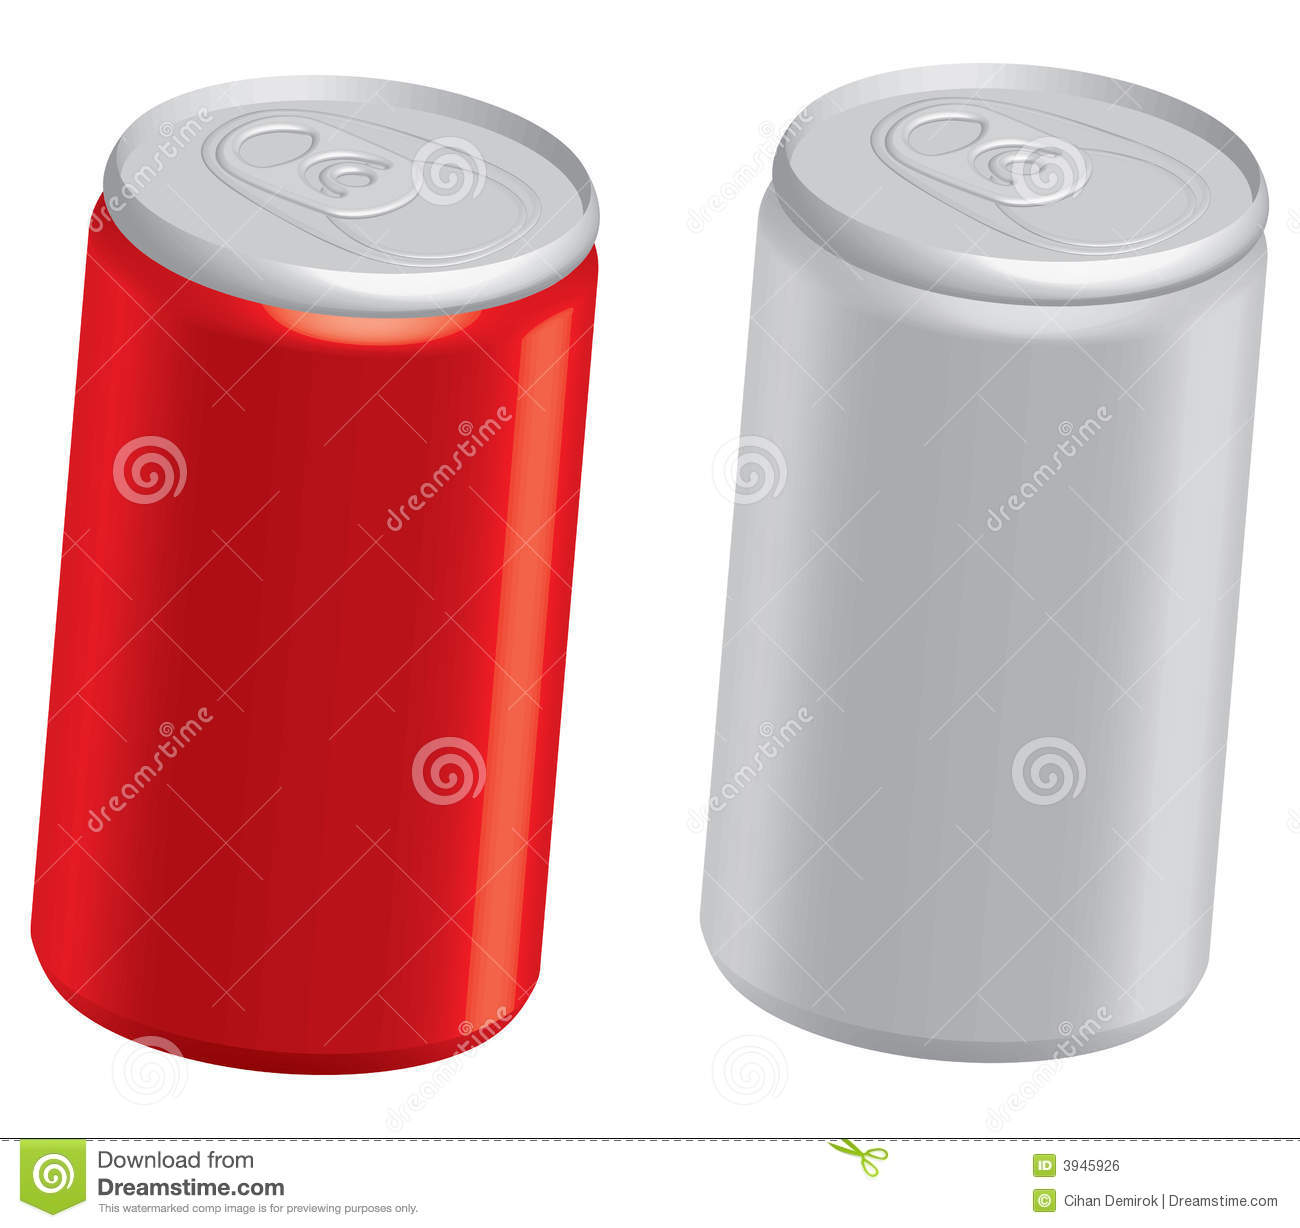 Cola Cans Royalty Free Stock Image   Image  3945926